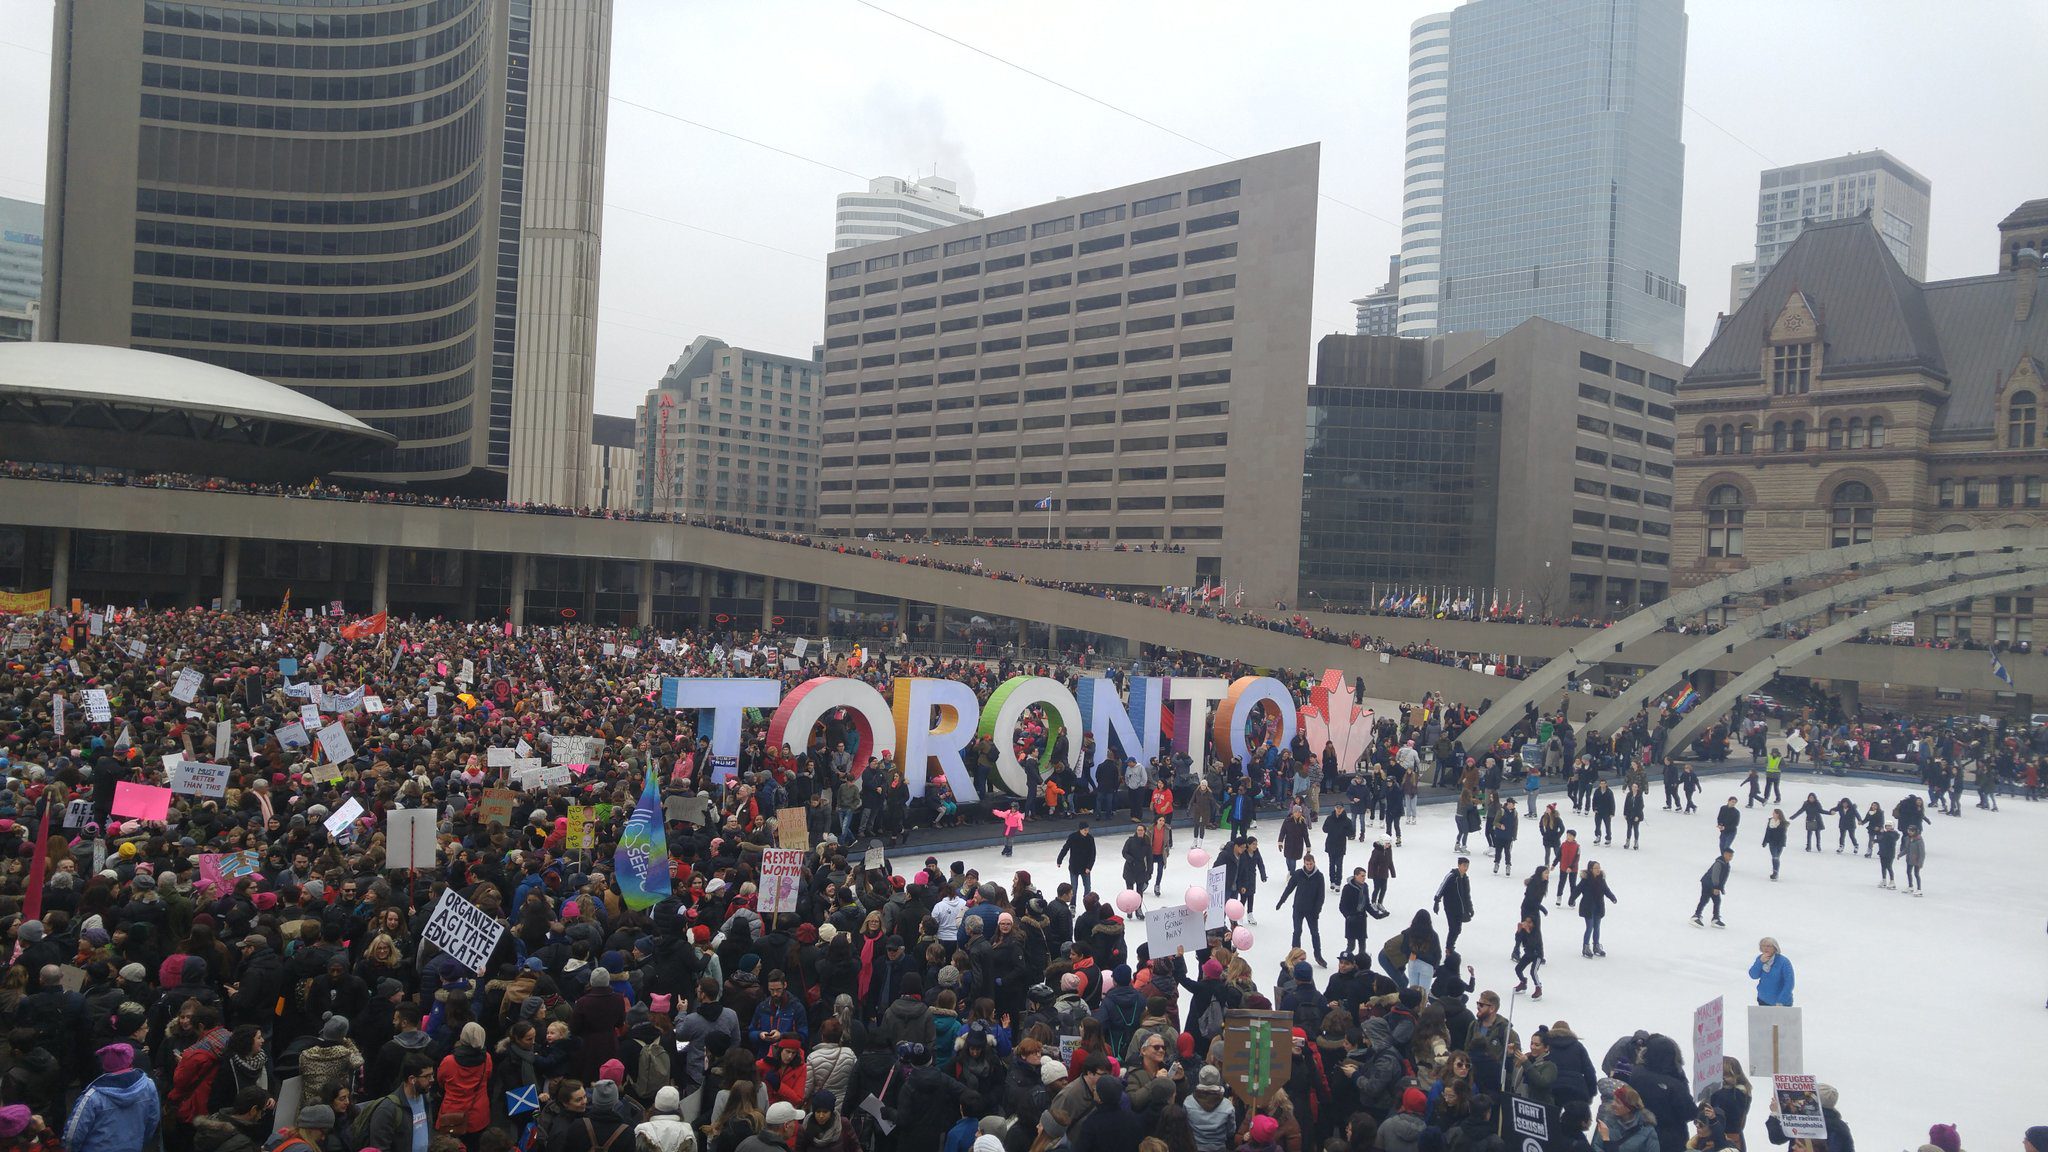 The Toronto Women's March on Washington assembles in Nathan Phillips Square. Image courtesy H.G. Watson.